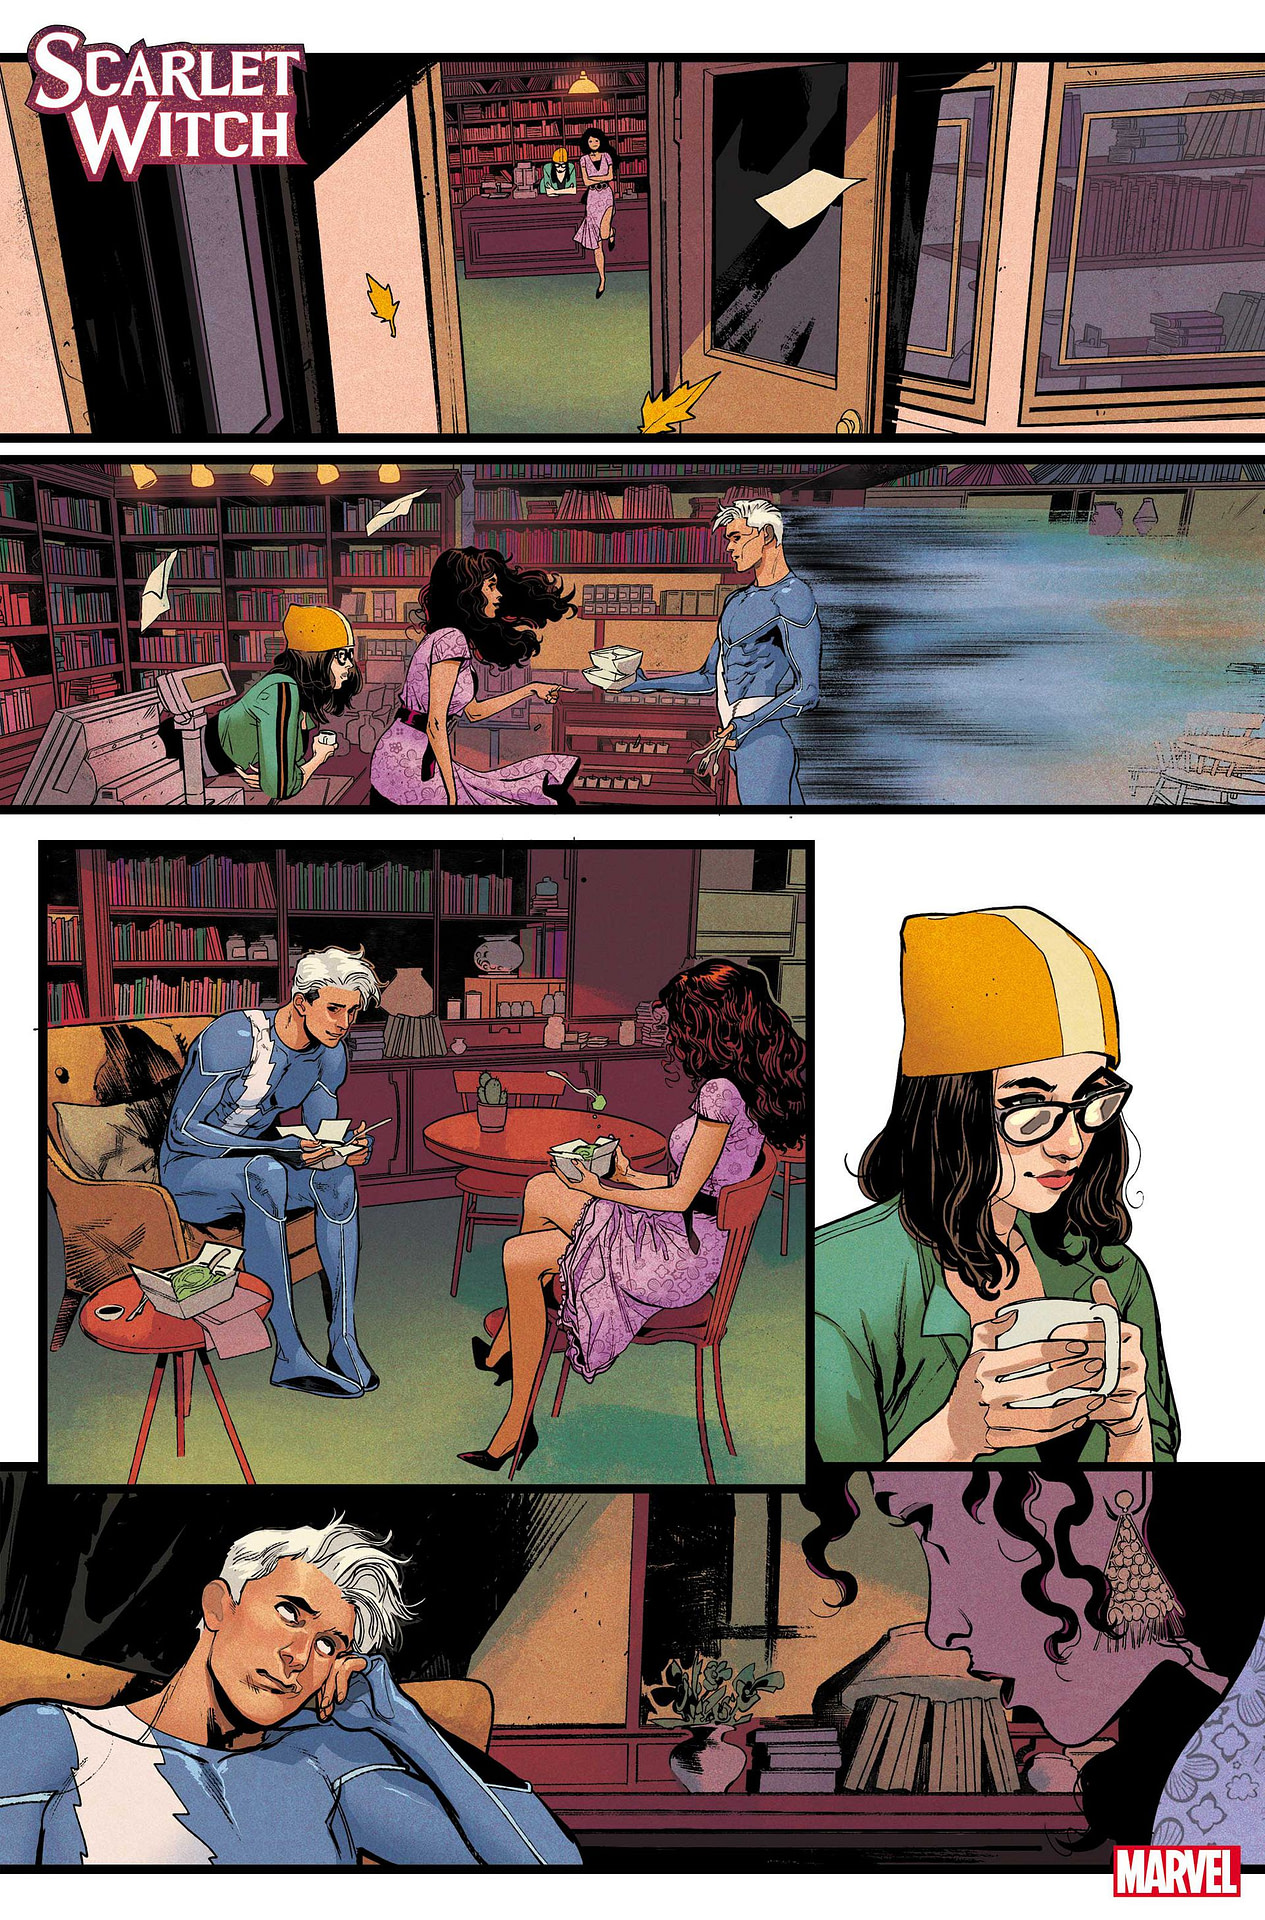 Quicksilver gets takeout and he and Wanda chat as Darcy looks on in Scarlet Witch #2 (2023). 